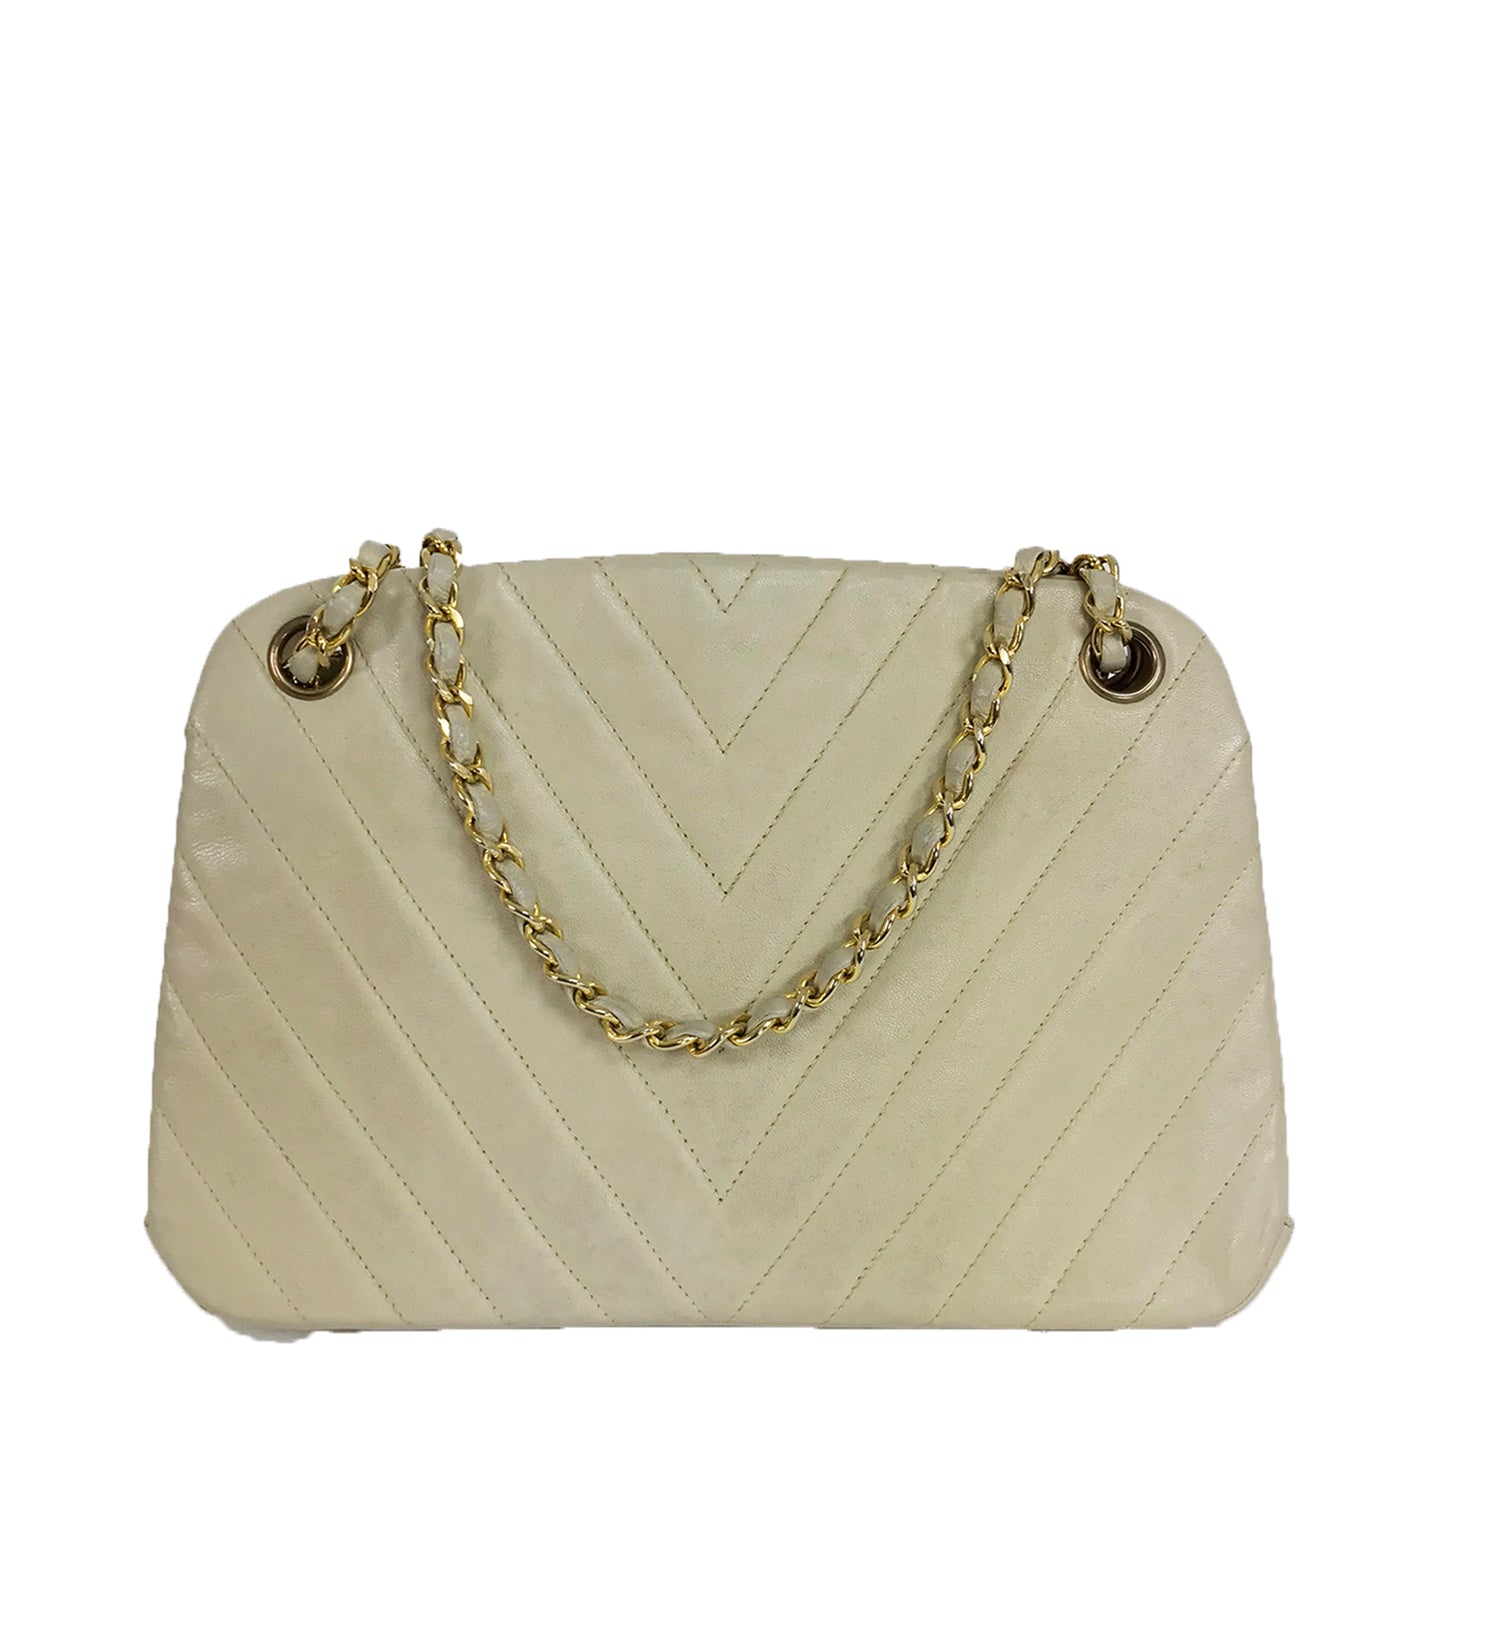 Chanel 1980s Ivory Chevron Kiss Lock Centre Chain Handle Bag For